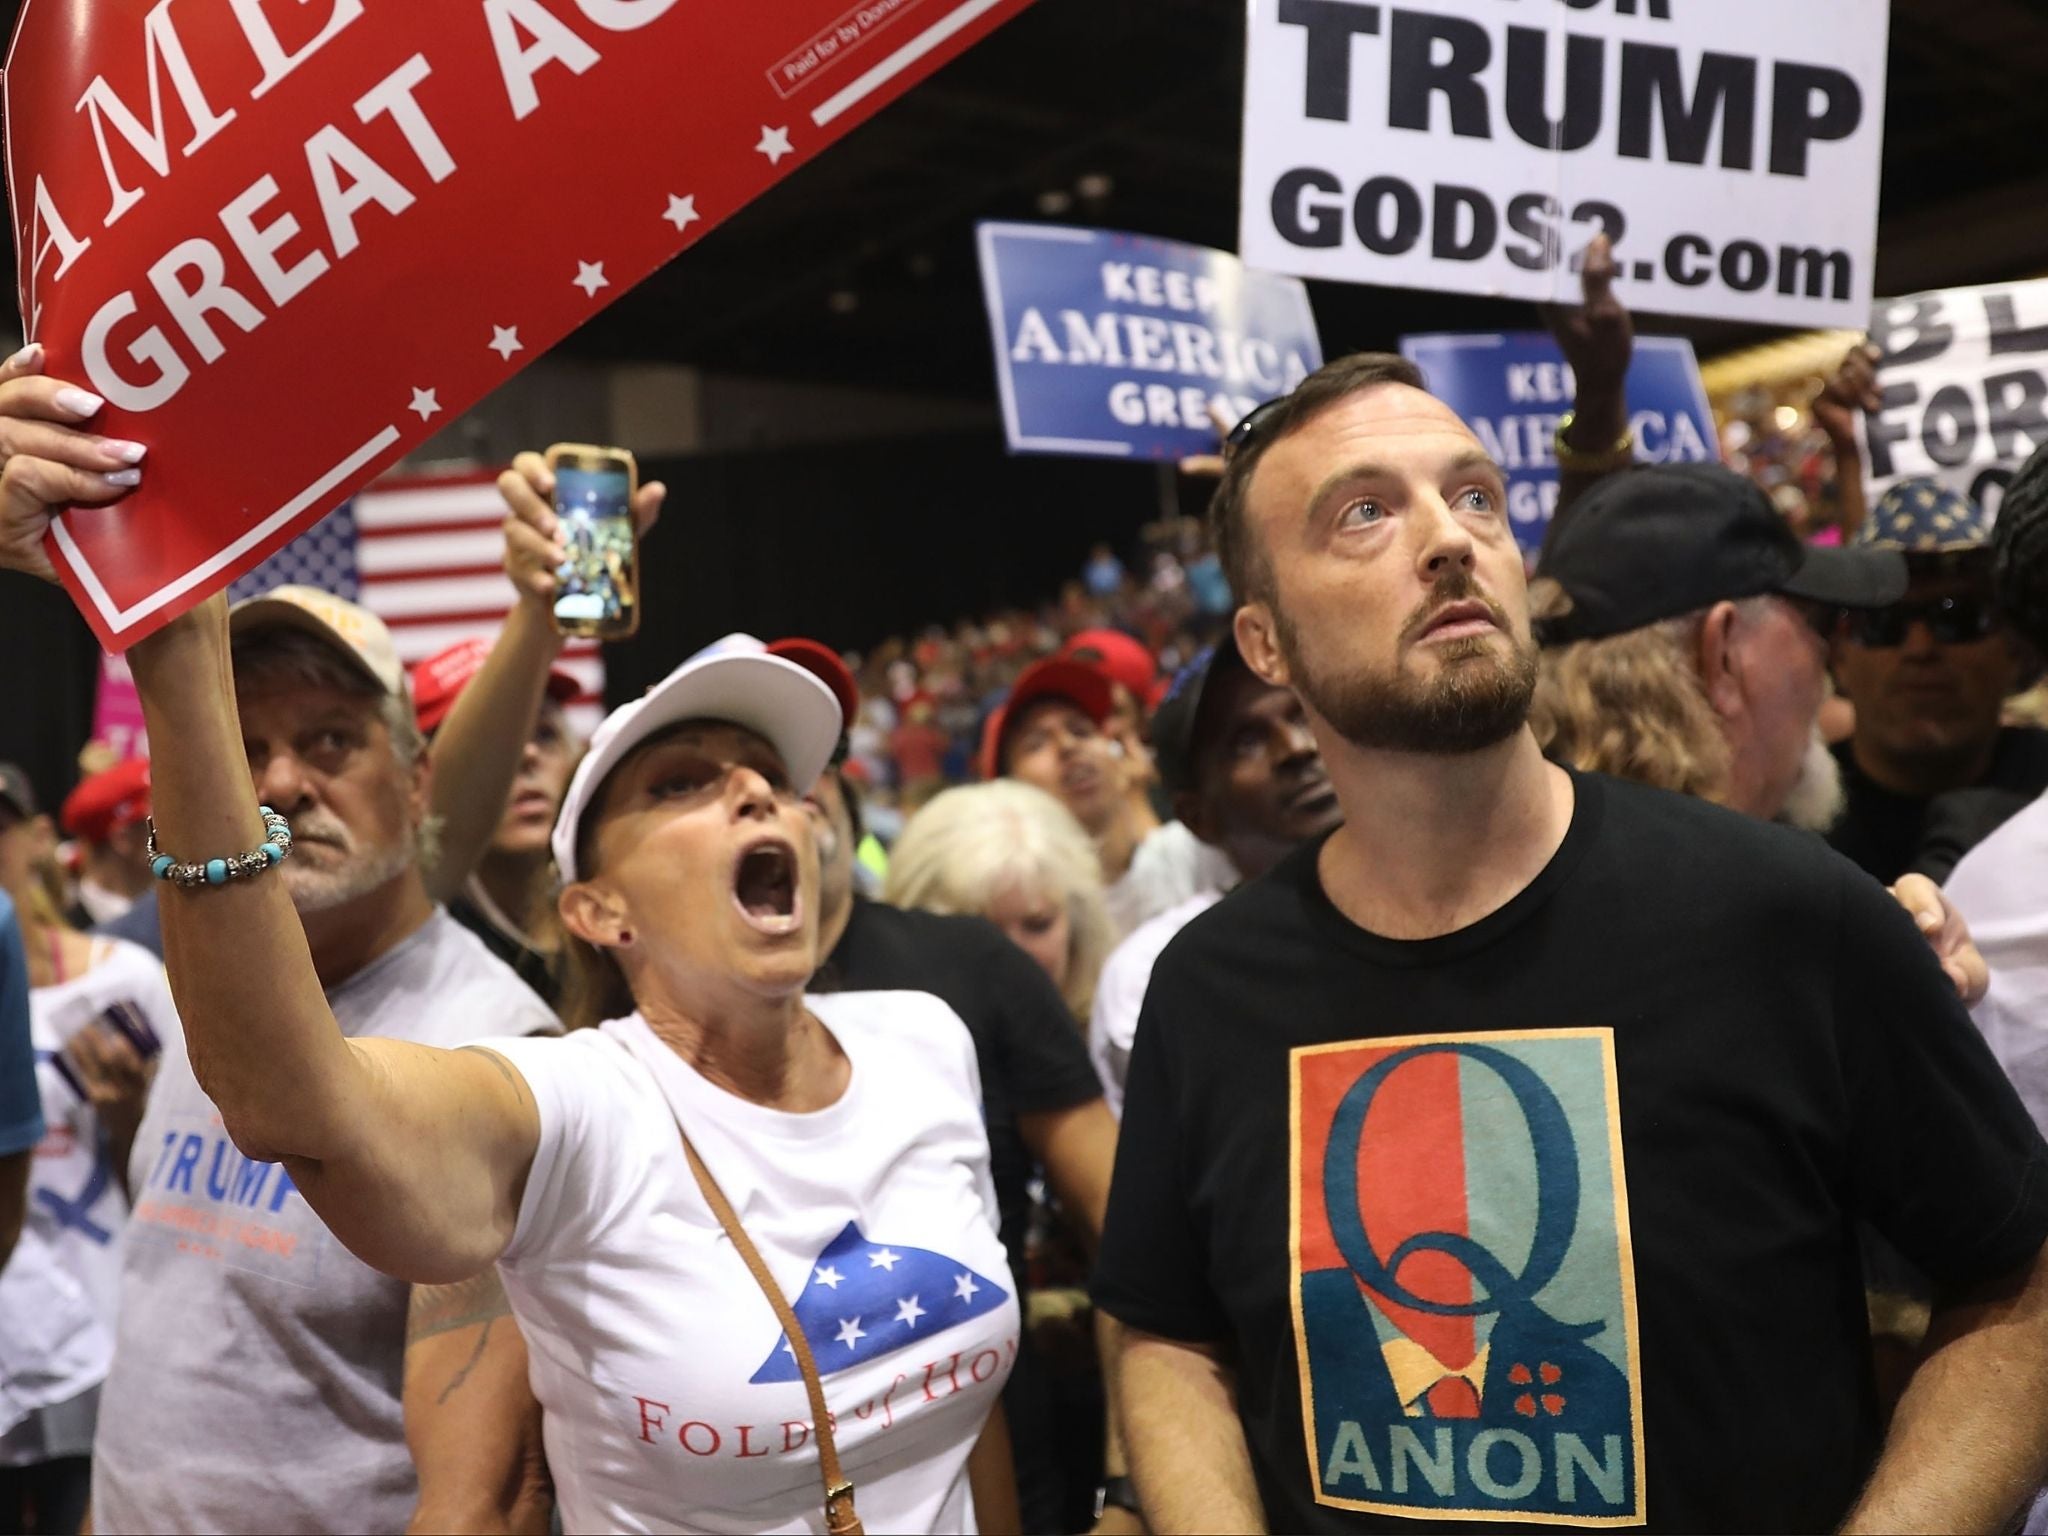 A man wearing a Q Anon shirt attends a rally for President Donald Trump at the Florida State Fair Grounds Expo Hall on July 31, 2018 in Tampa, Florida.